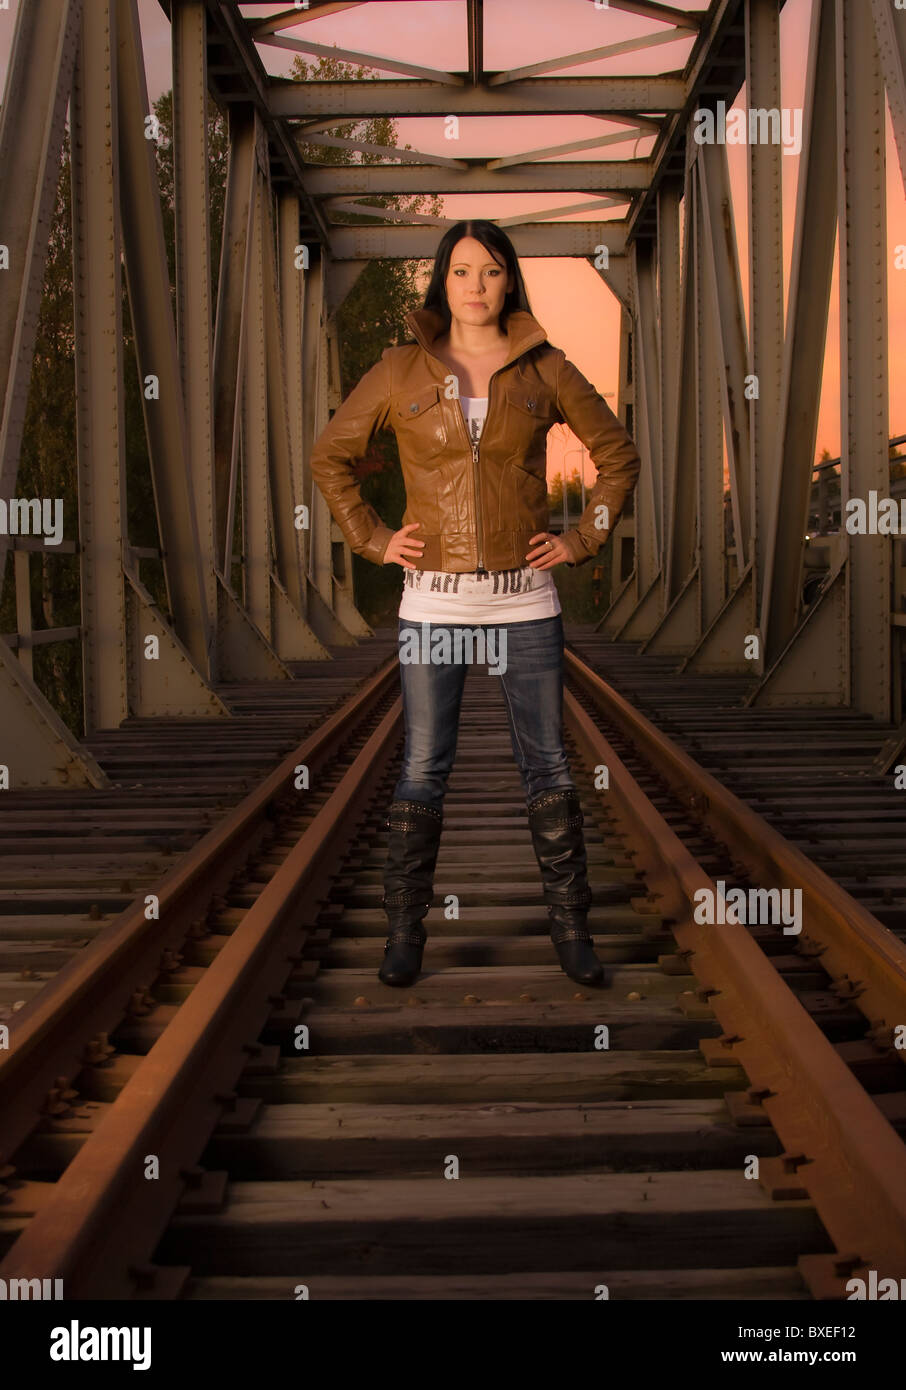 A young woman in a leather jacket standing on a railroad bridge in the evening sun. Stock Photo